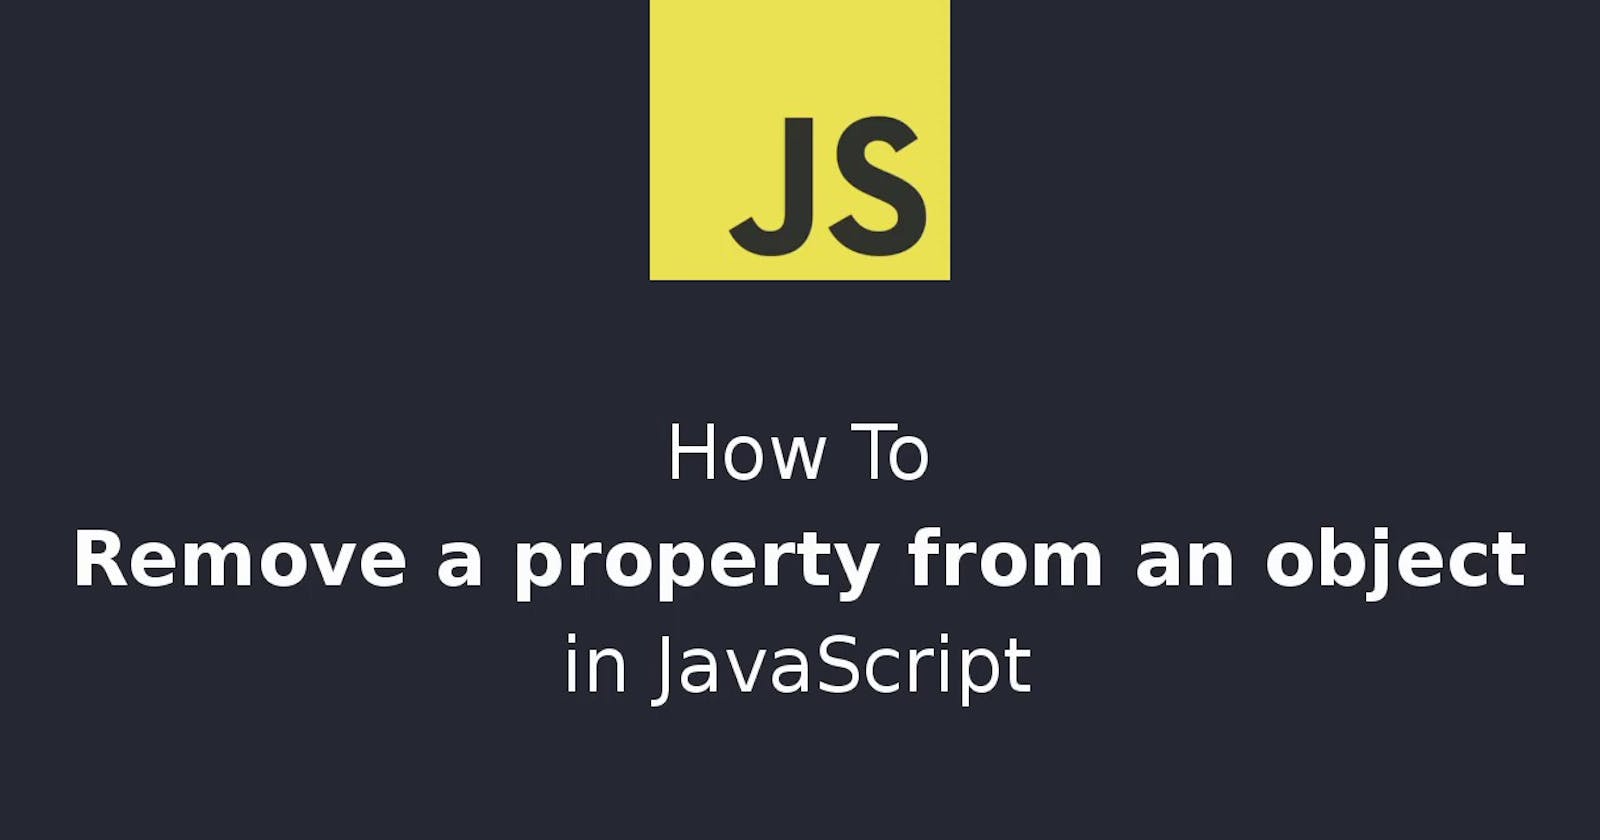 How to Remove a Property from a JavaScript Object